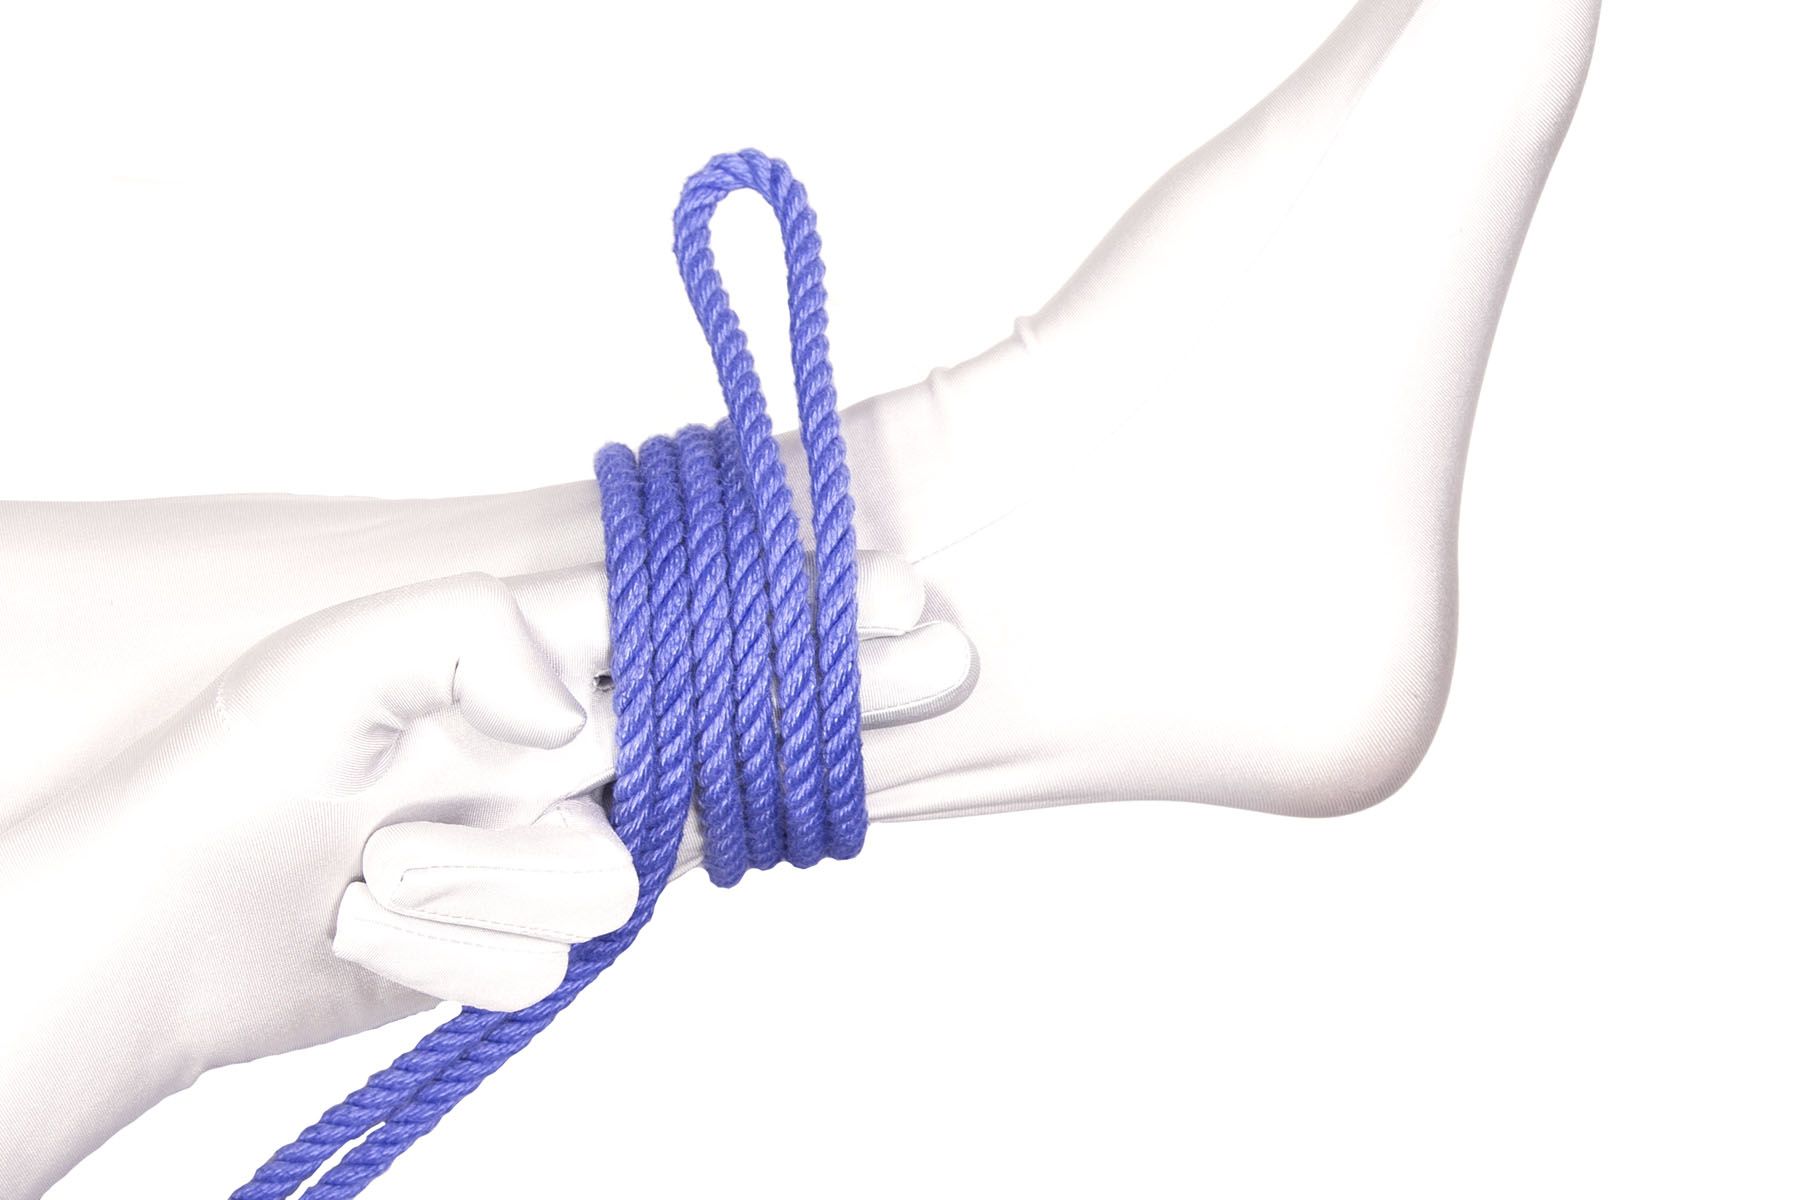 A doubled blue rope has been wrapped around the ankle twice. The rope goes over the index and middle fingers, over the top of the ankle, behind the ankle, and back under the bottom of the ankle. The second wrap is closer to the foot than the first wrap. A six inch bight hangs off the top of the ankle.